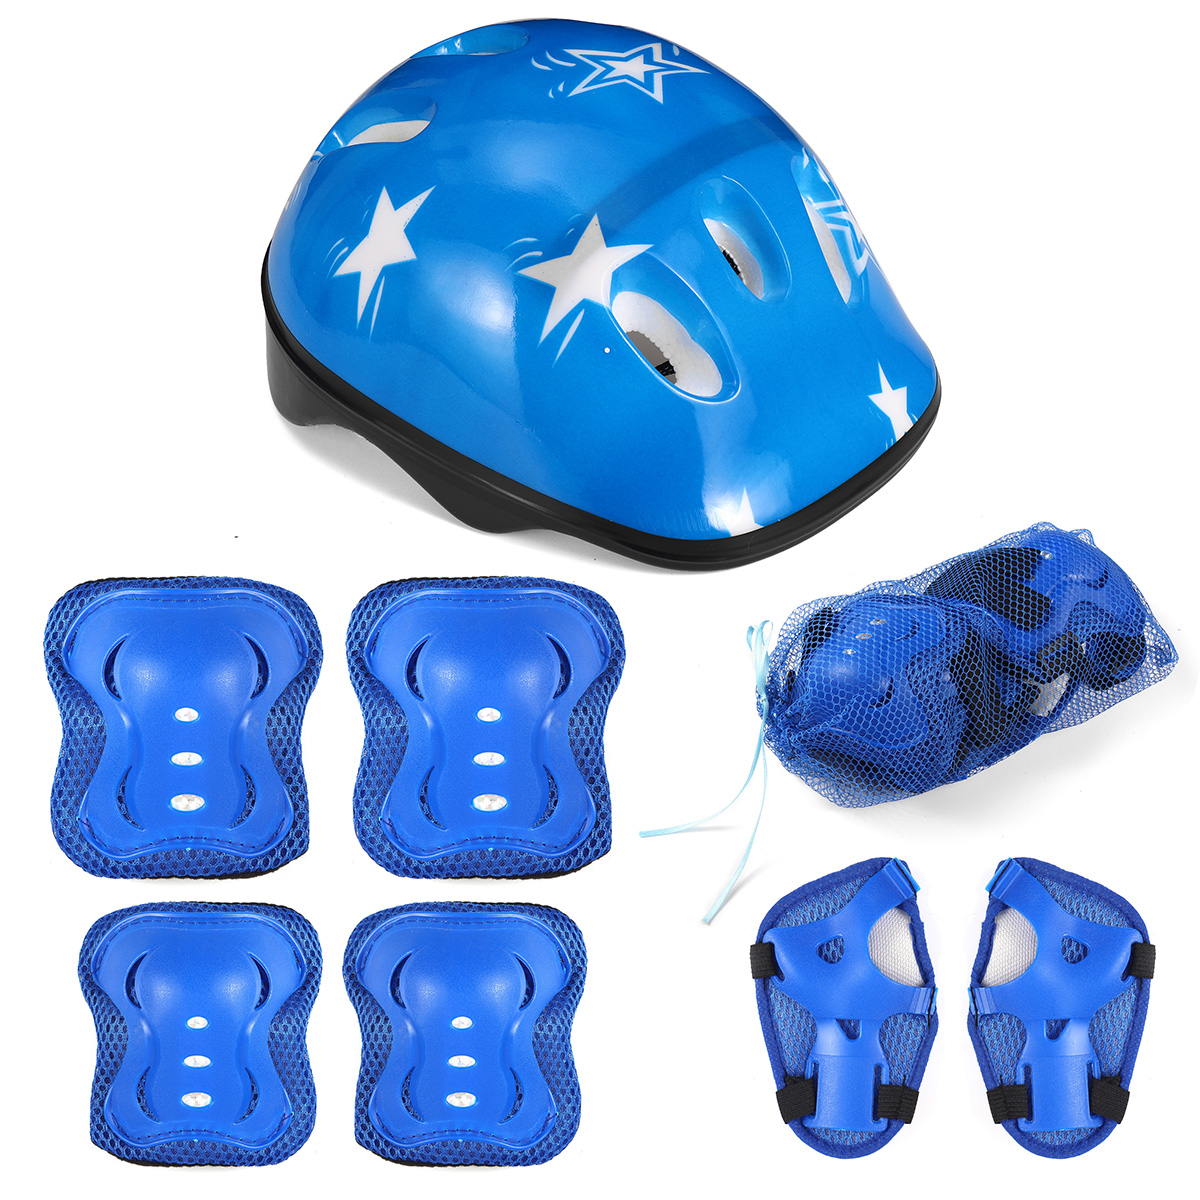 7Pcs-Elbow-Knee-Wrist-Protective-Guard-Elbow-Pads-Safety-Gear-Pad-Wrist-Guard-Skateboard-Protective--1781562-12